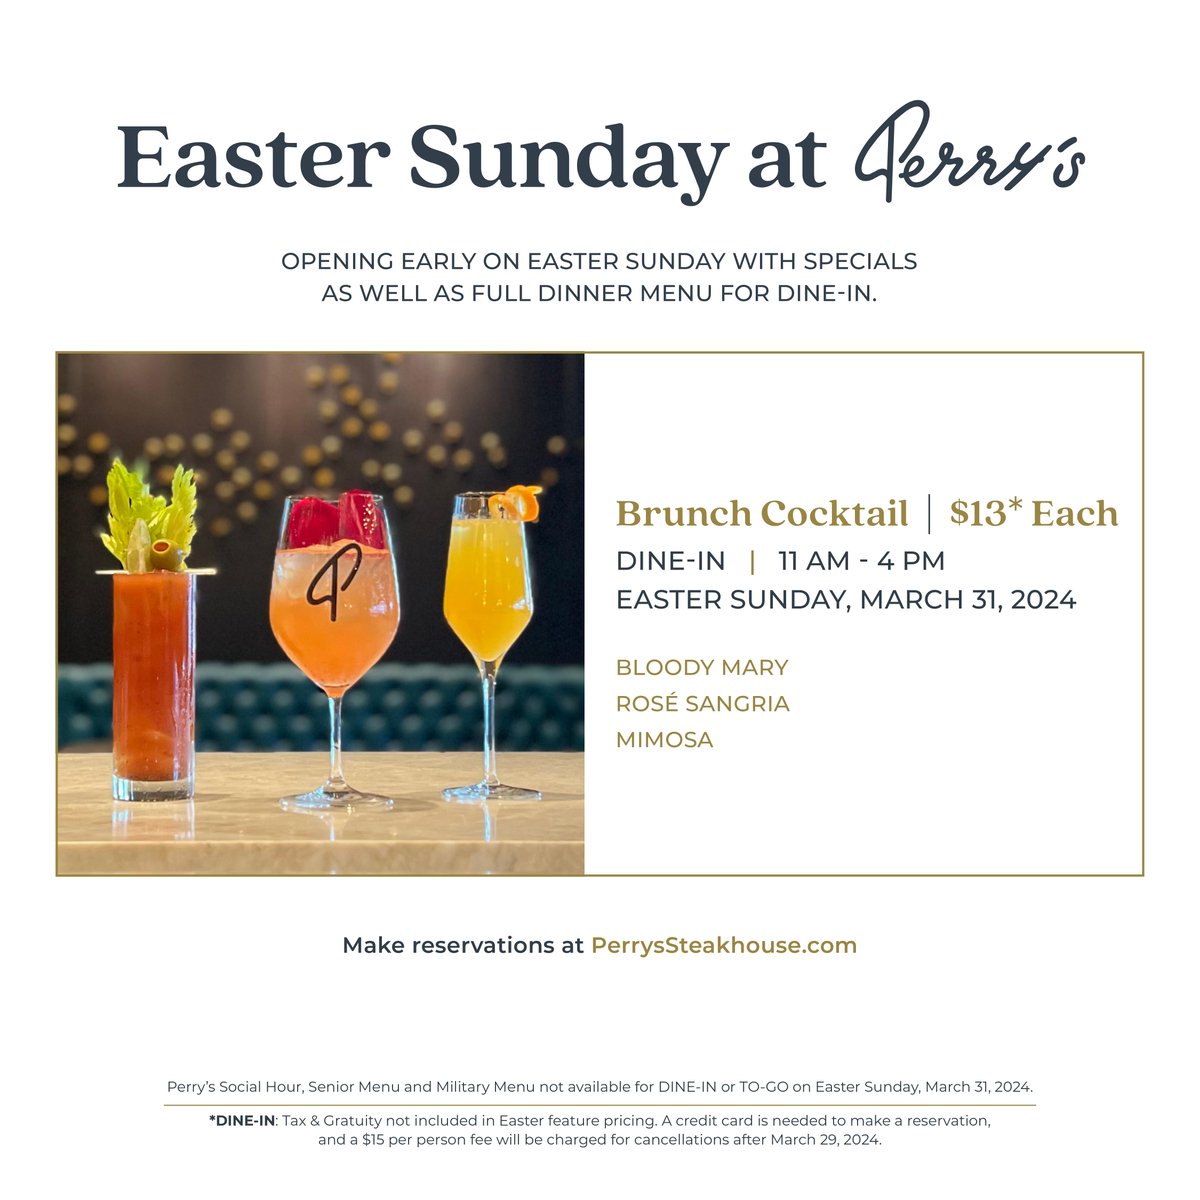 It’s never too early to start planning your Easter feast!

Doors open at 11 am on Easter Sunday to savor Perry's Sliced, Double Smoked, Triple Glazed Ham, Full Dinner Menu, Pork Chop Sunday Supper, Brunch Cocktails, and more!

Make a reservation today: perryssteakhouse.com/specials/easte…